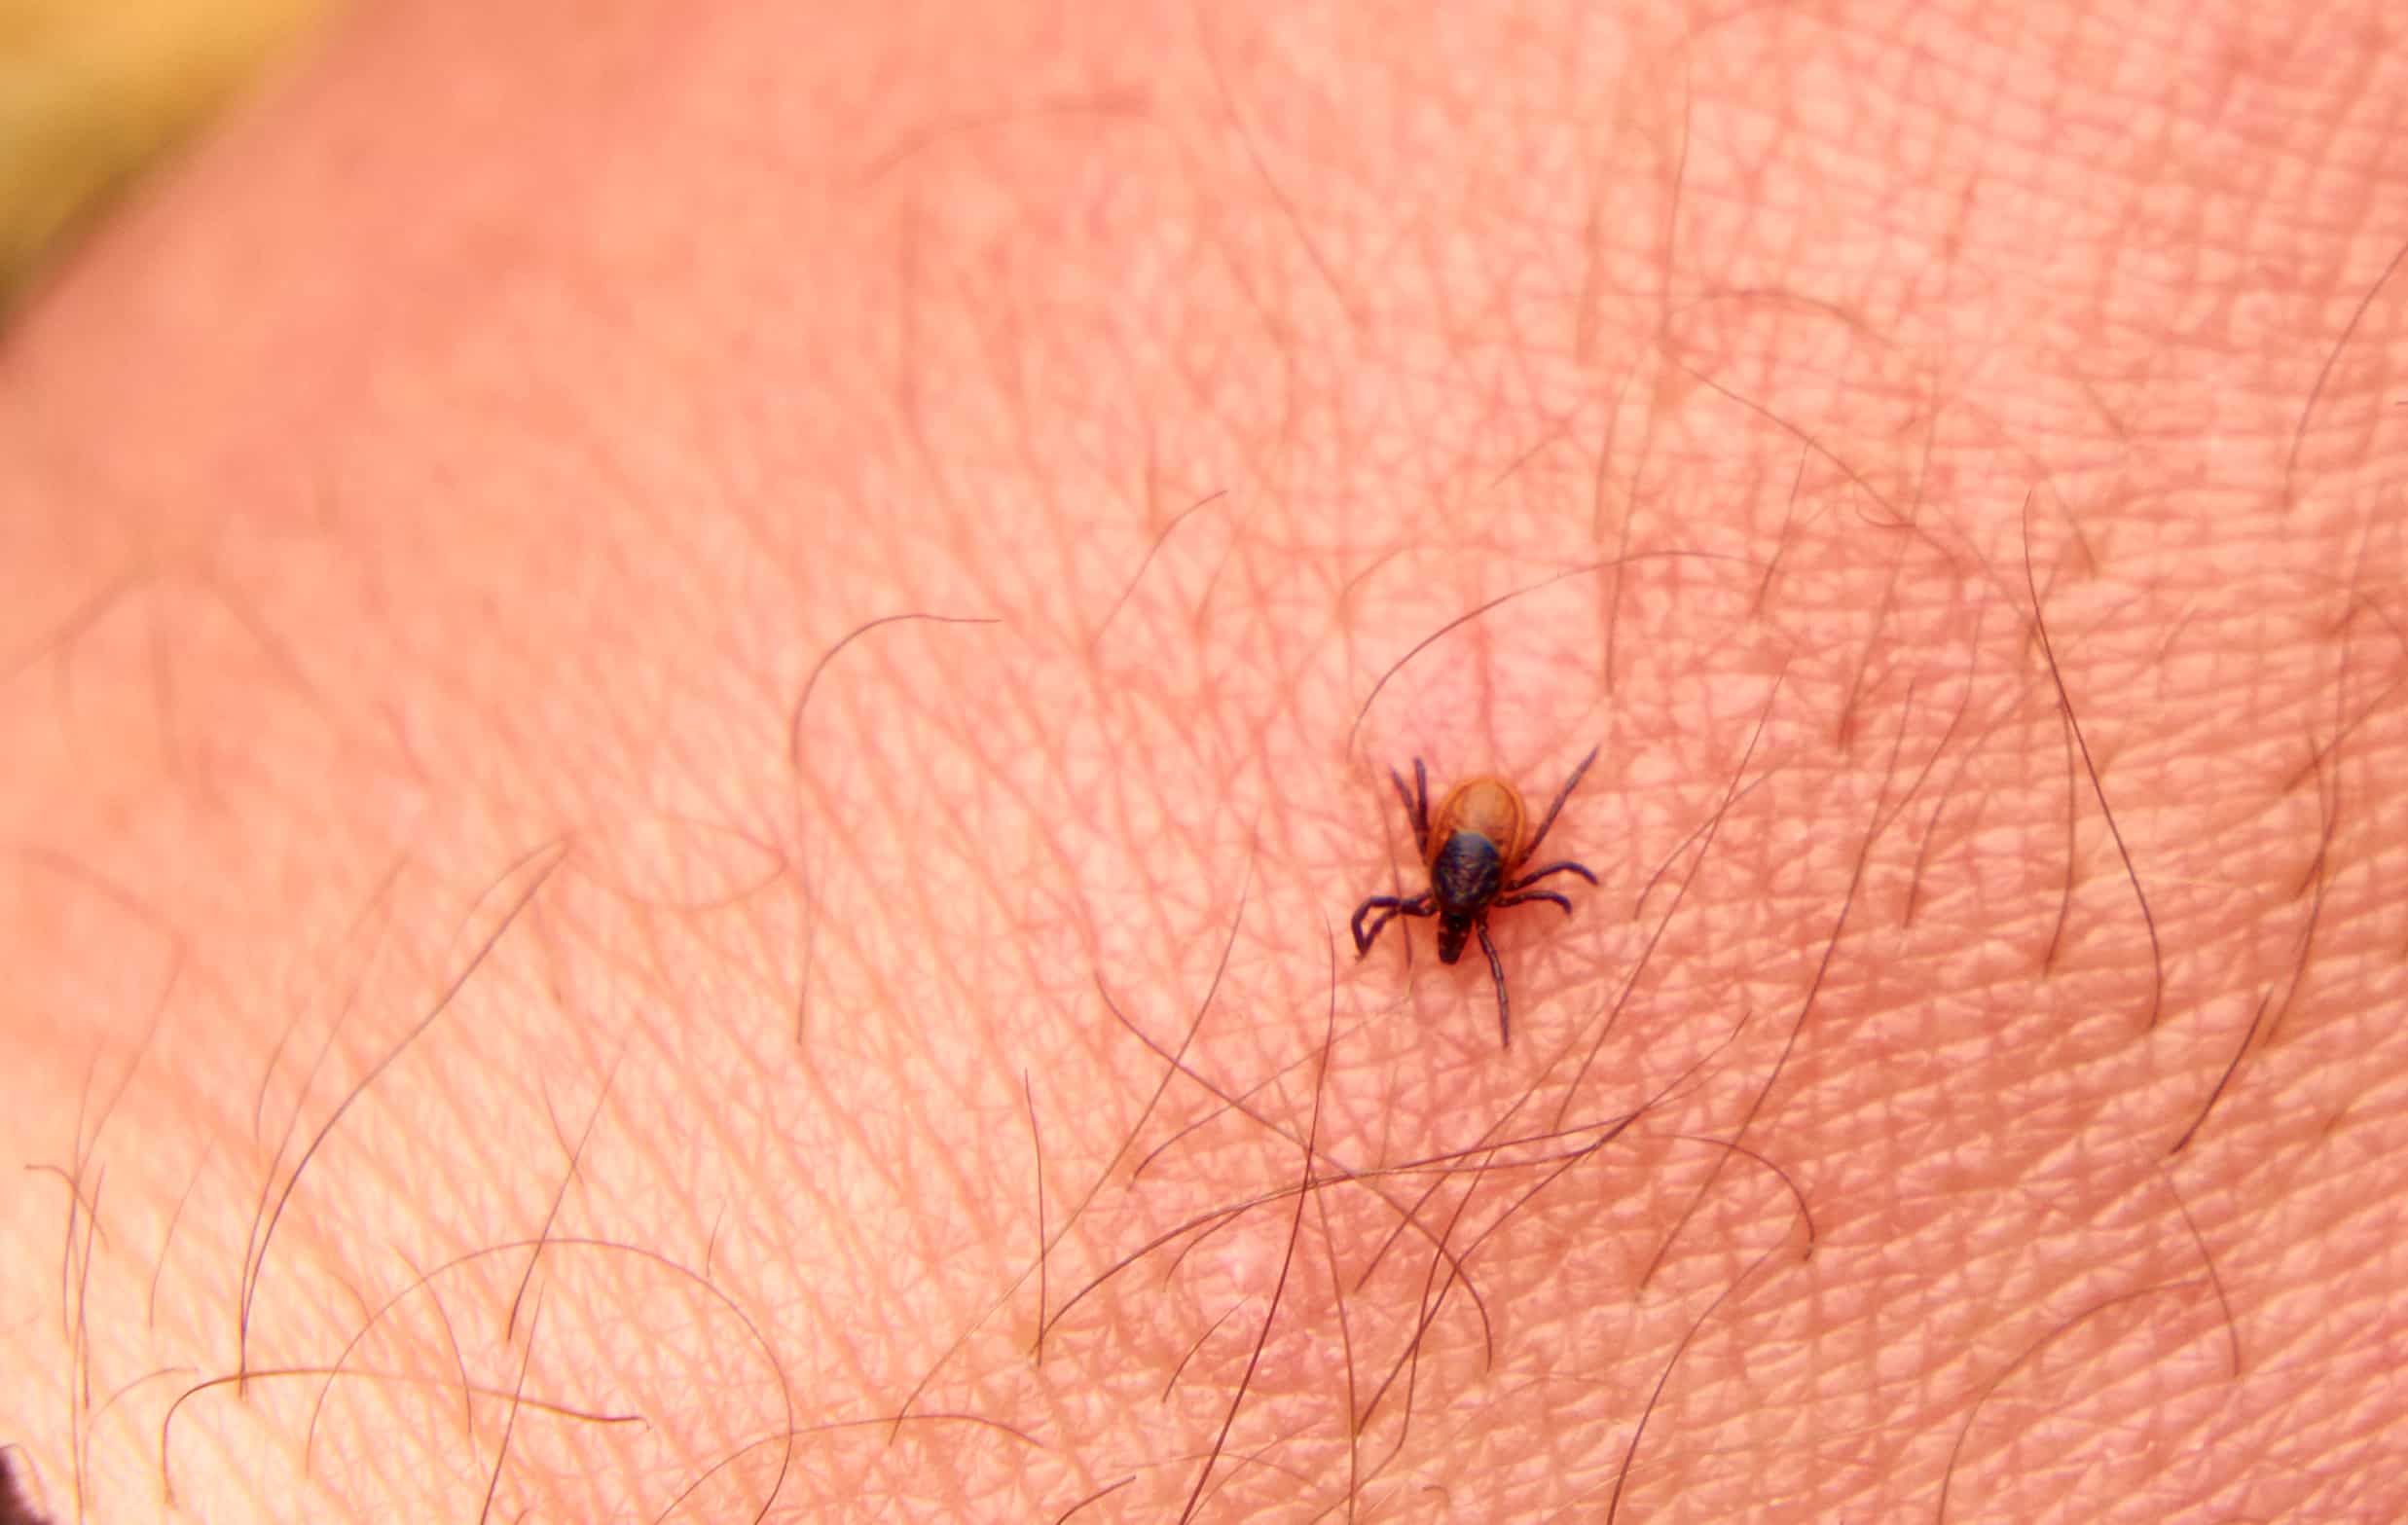 Chiggers Attach to a Host